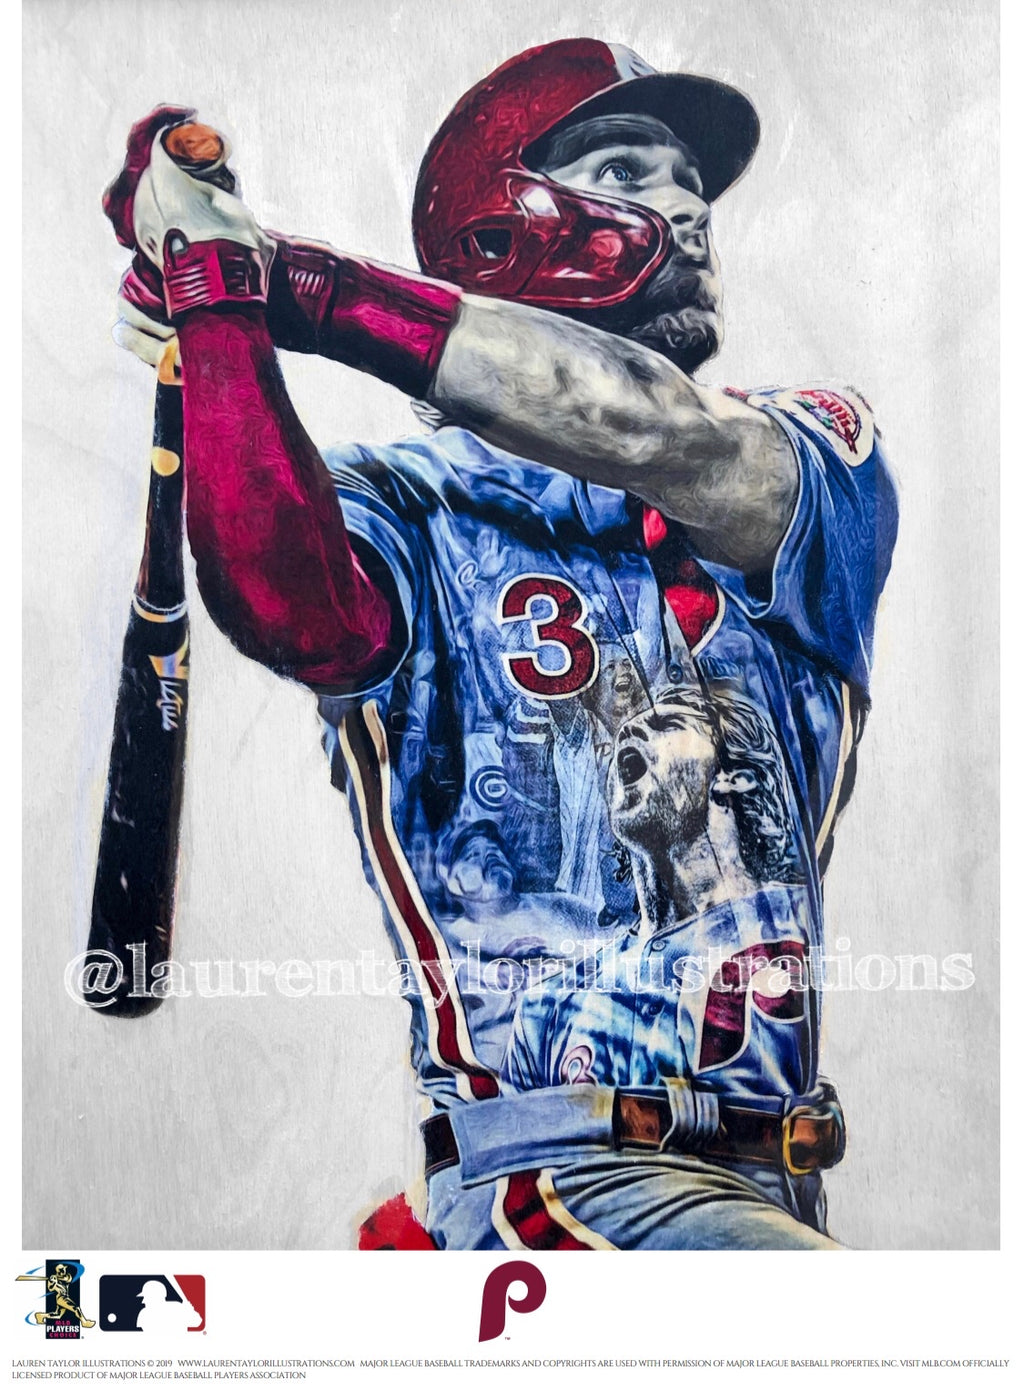 Mr. Padre (Tony Gwynn) San Diego Padres - Officially Licensed MLB  Cooperstown Collection Print - Limited Release